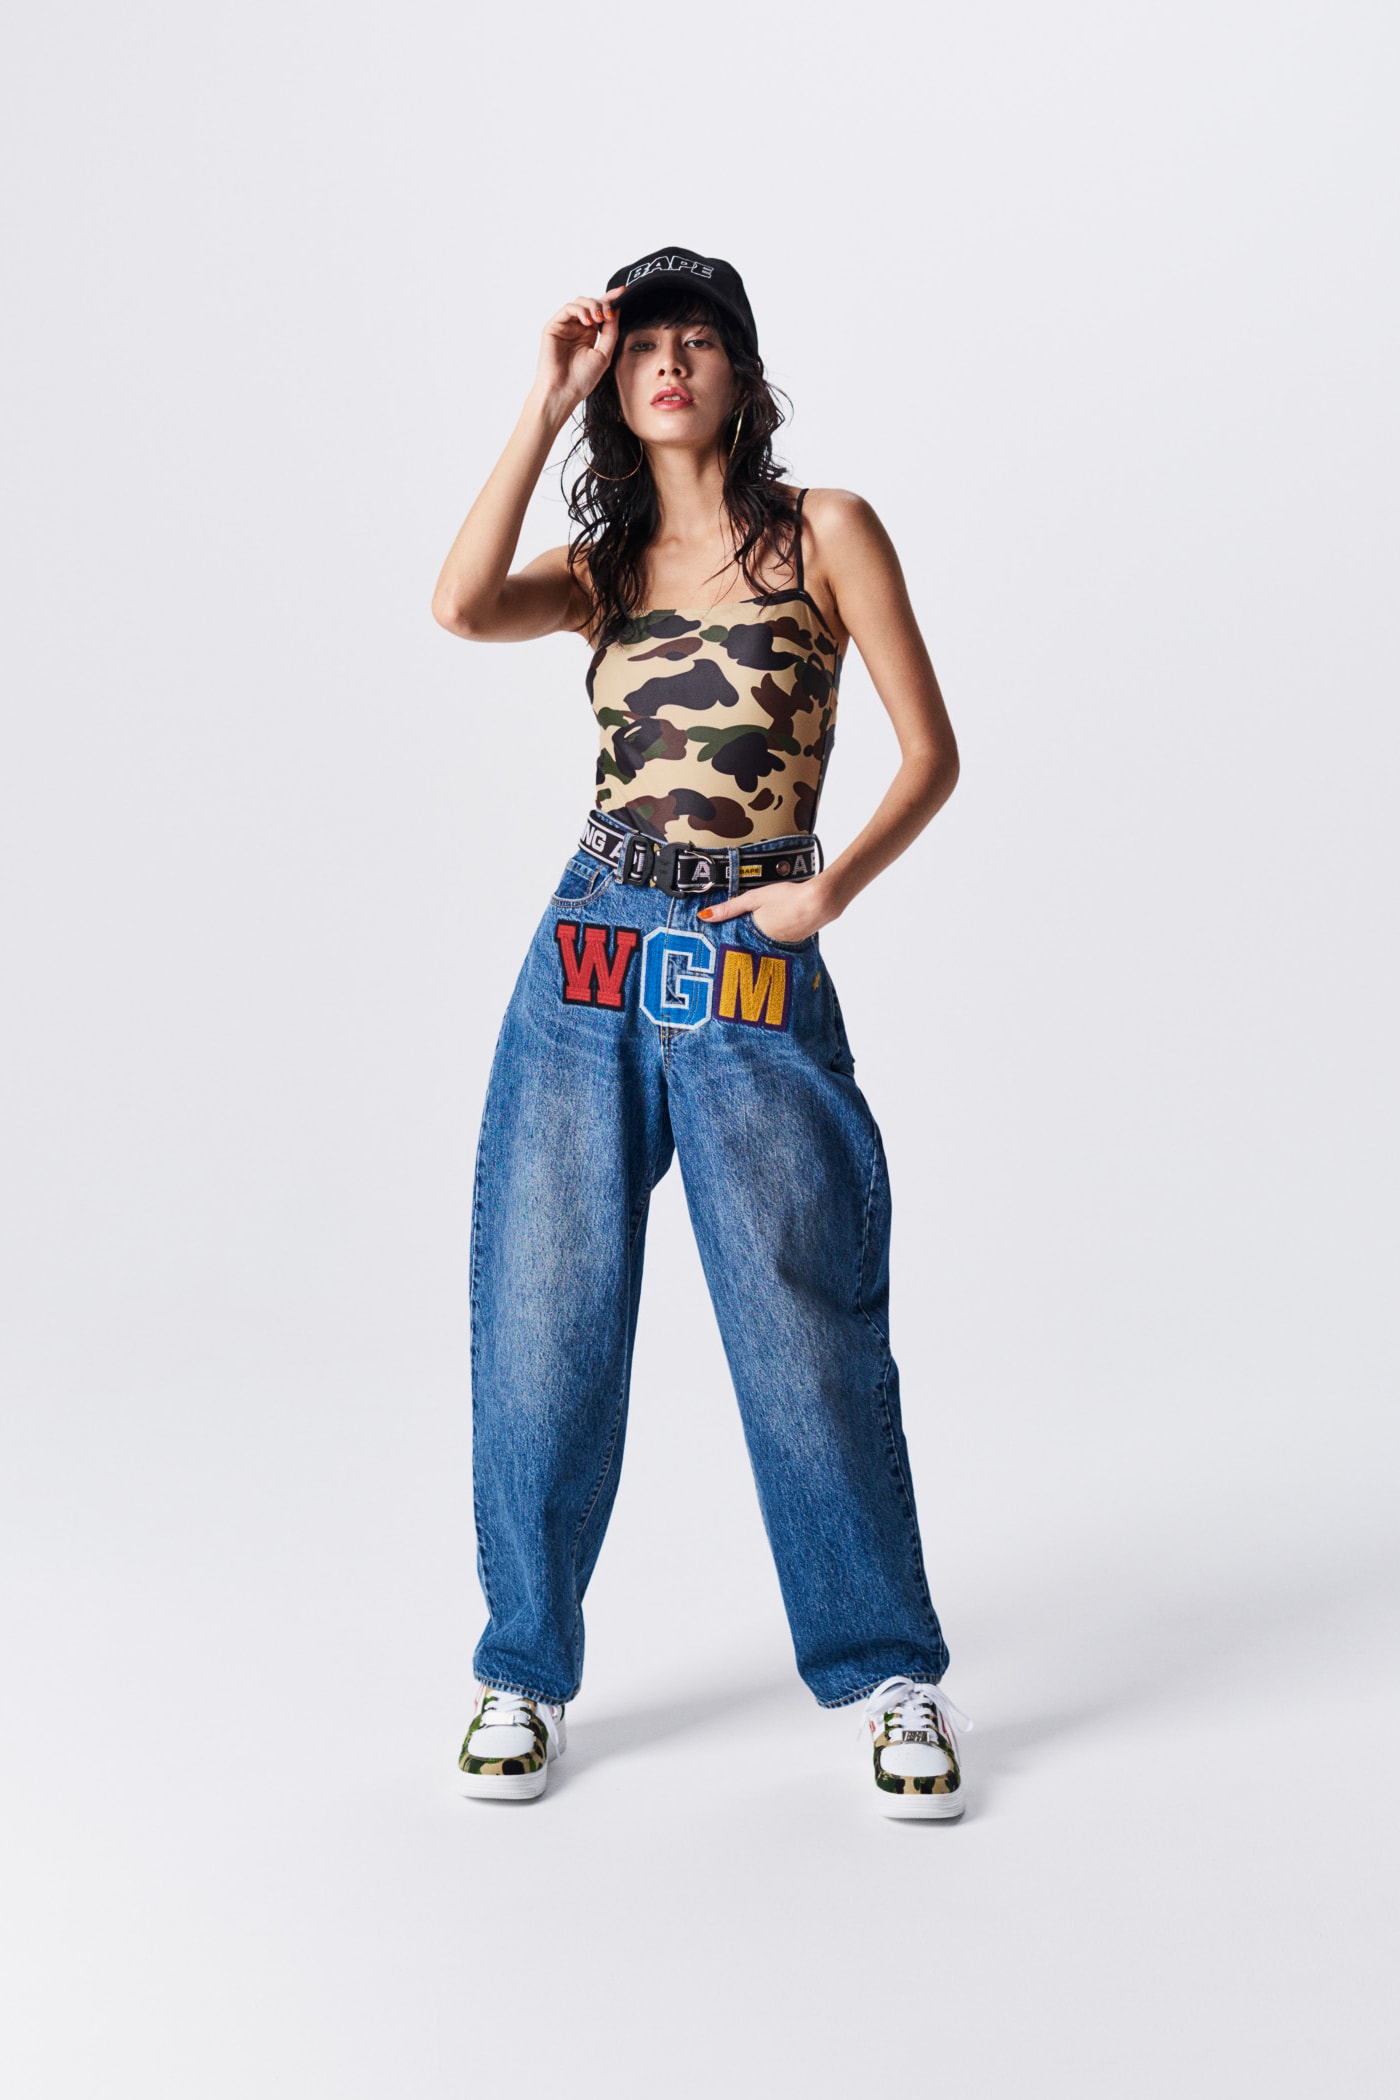 A Bathing Ape Spring Summer 2019 Collection Lookbook Camouflage Bodysuit Jeans Blue